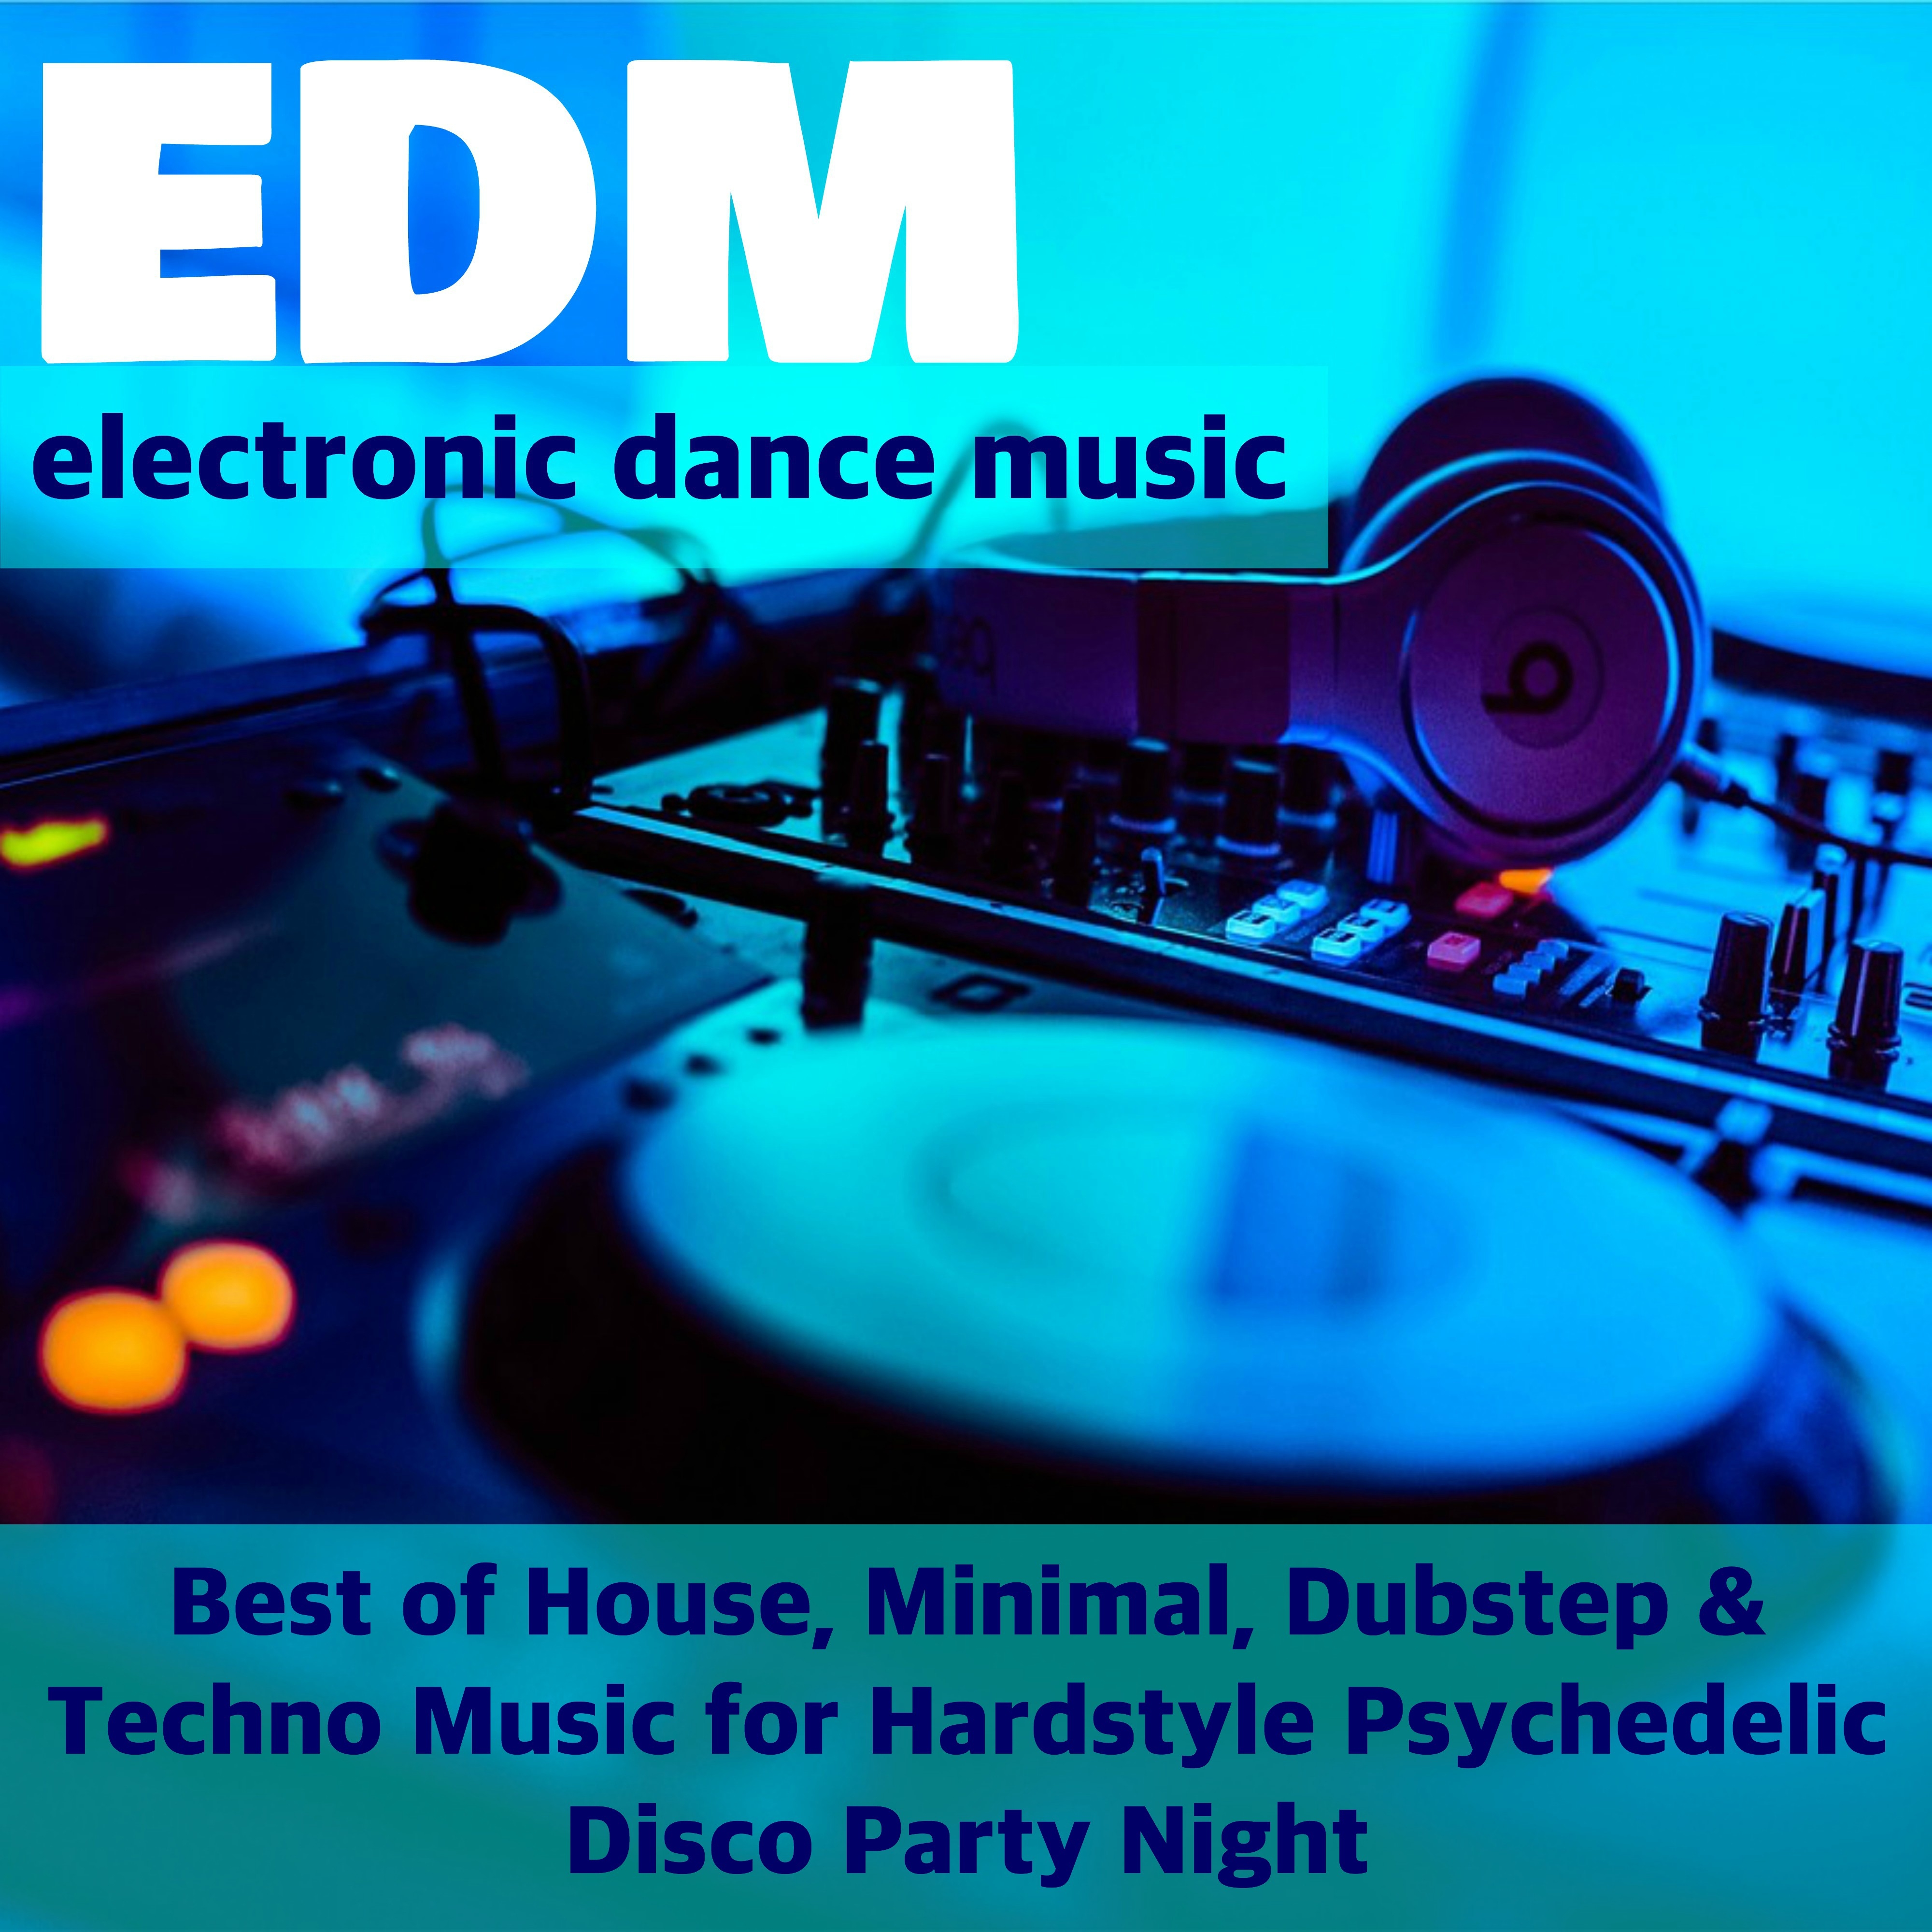 Top EDM - Electronic Dance Music Playlist: Best of House, Minimal, Dubstep & Techno Music for Hardstyle Psychedelic Disco Party Night